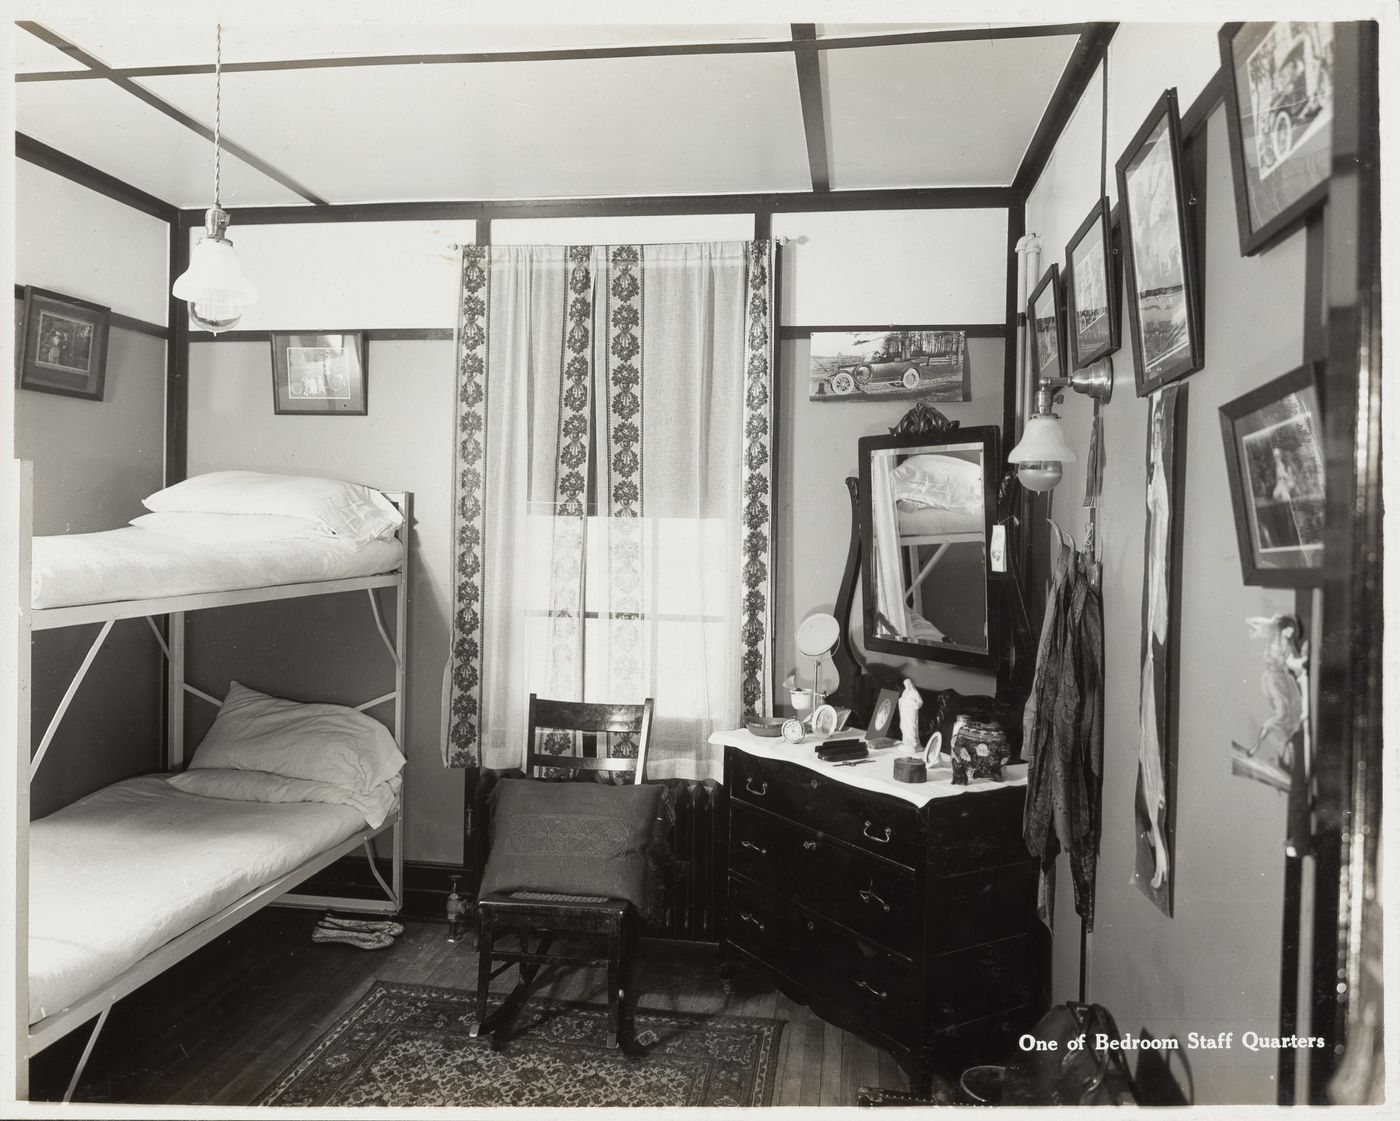 Interior view of bedroom in staff quarters at the Energite Explosives Plant No. 3, the Shell Loading Plant, Renfrew, Ontario, Canada